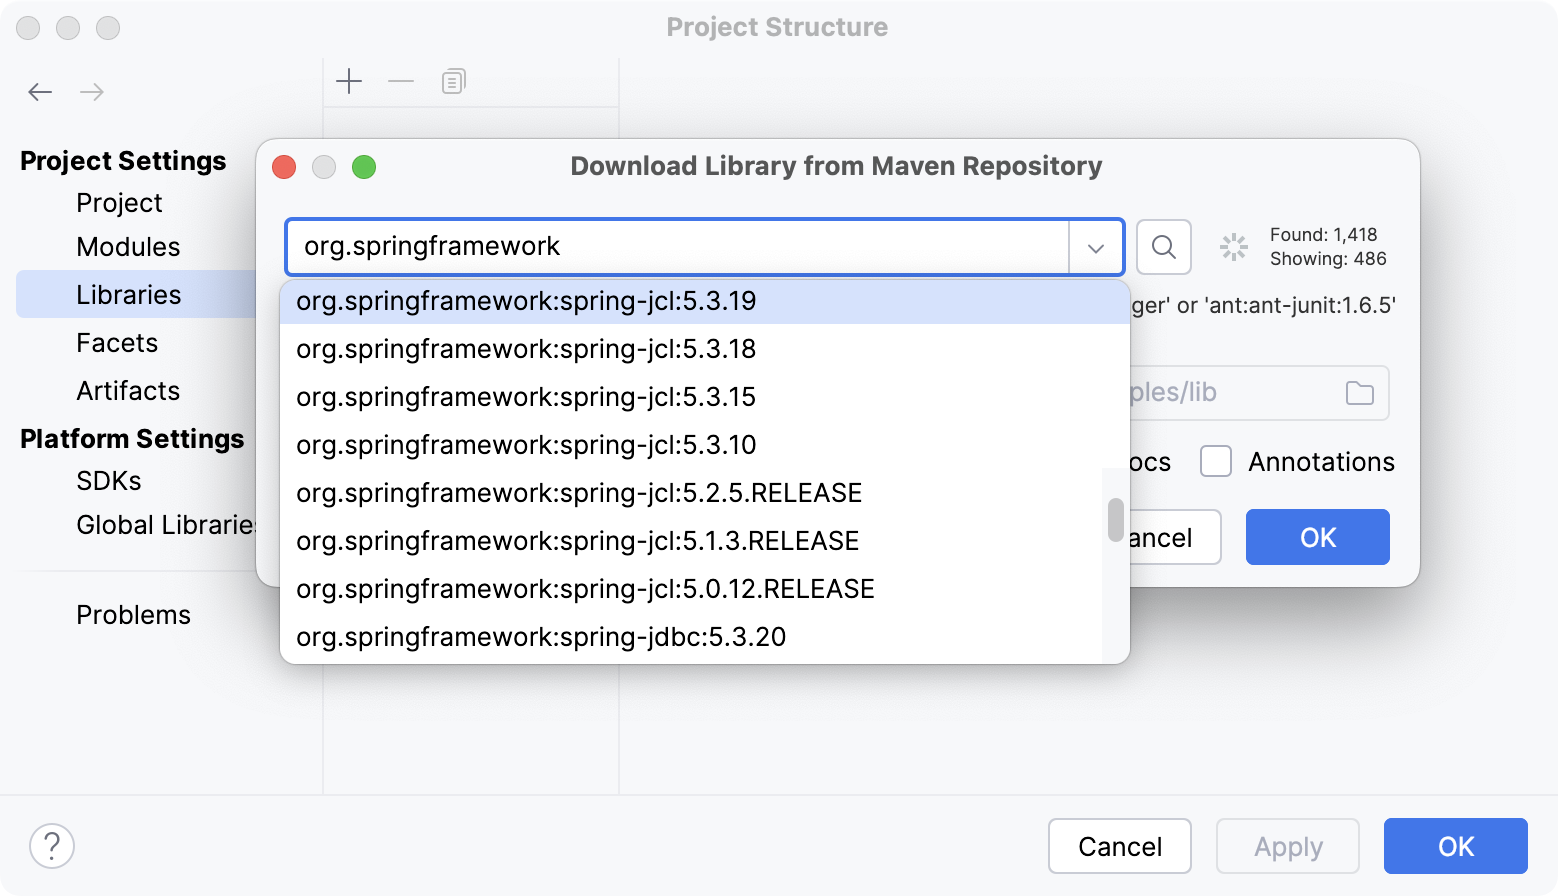 Downloading a library from Maven